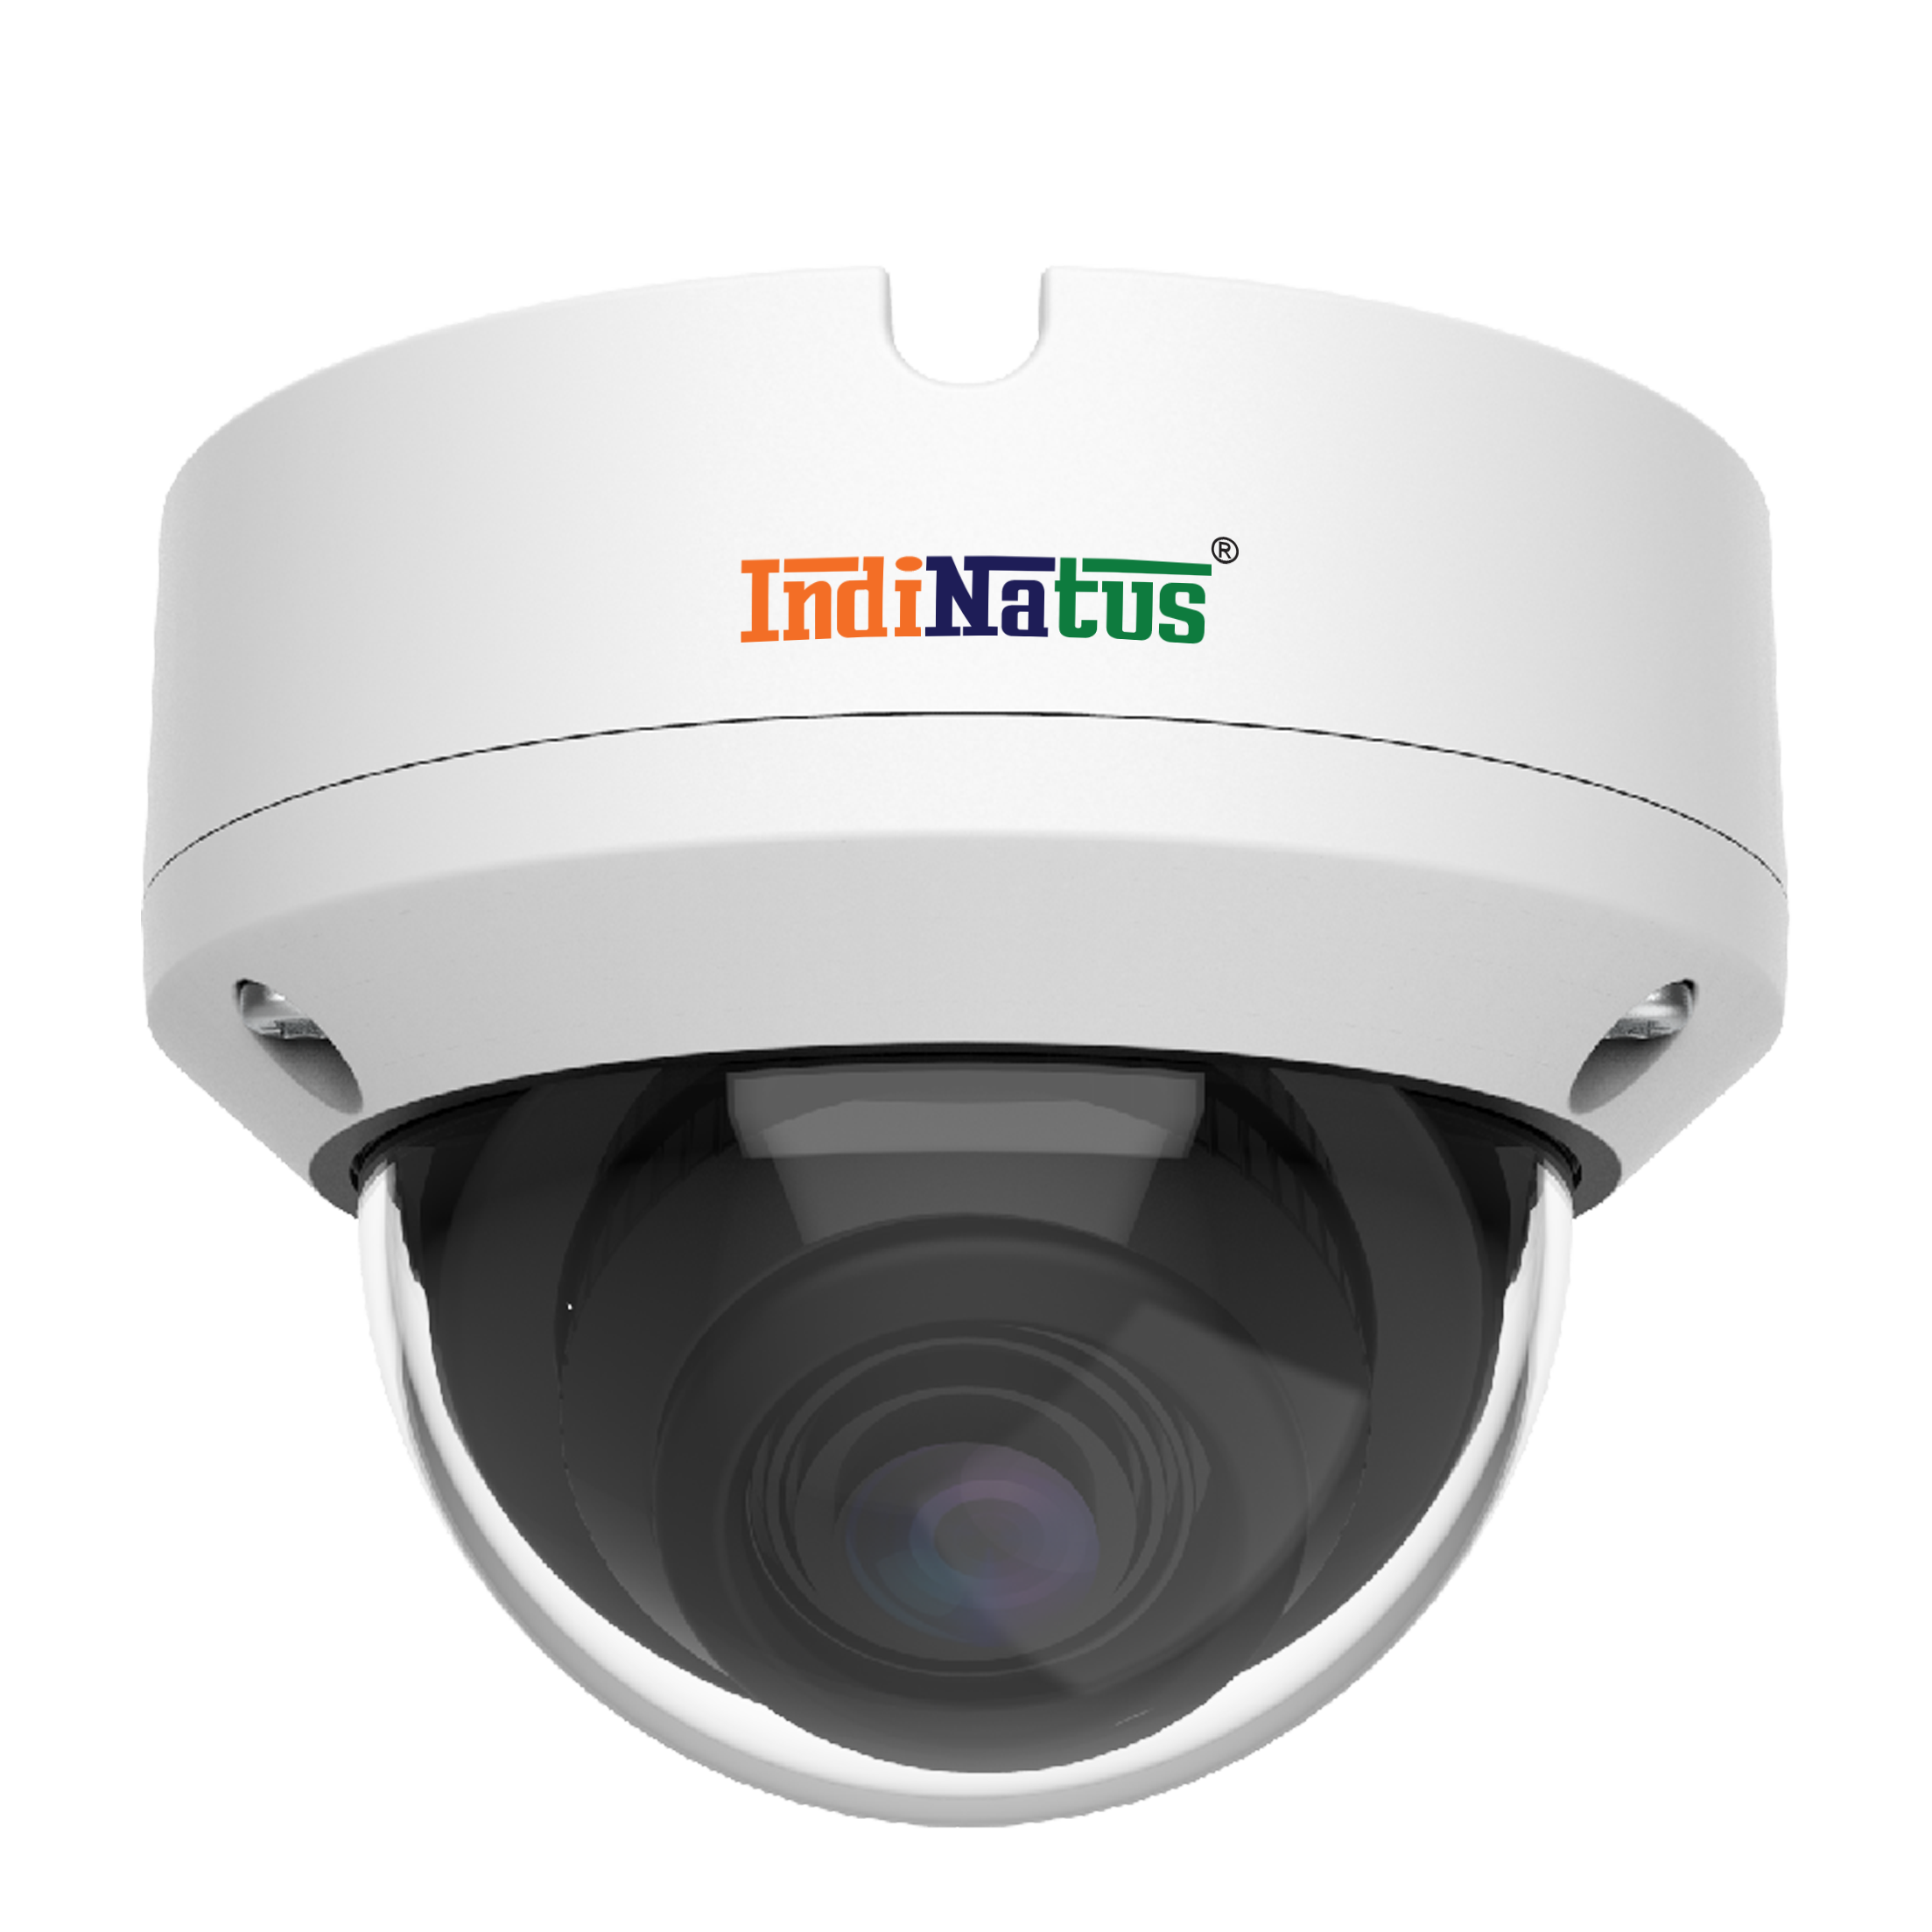 5-Megapixel Dome Network Camera, IN-IPC2N35P-I3UZSD,Top ten manufacturer  of CCTV Camera of India, ONVIF IP Network Camera, Best CCTV Camera on GEM portal, NDAA Compliant CCTV Camera, Best OEM Of CCTV in India 